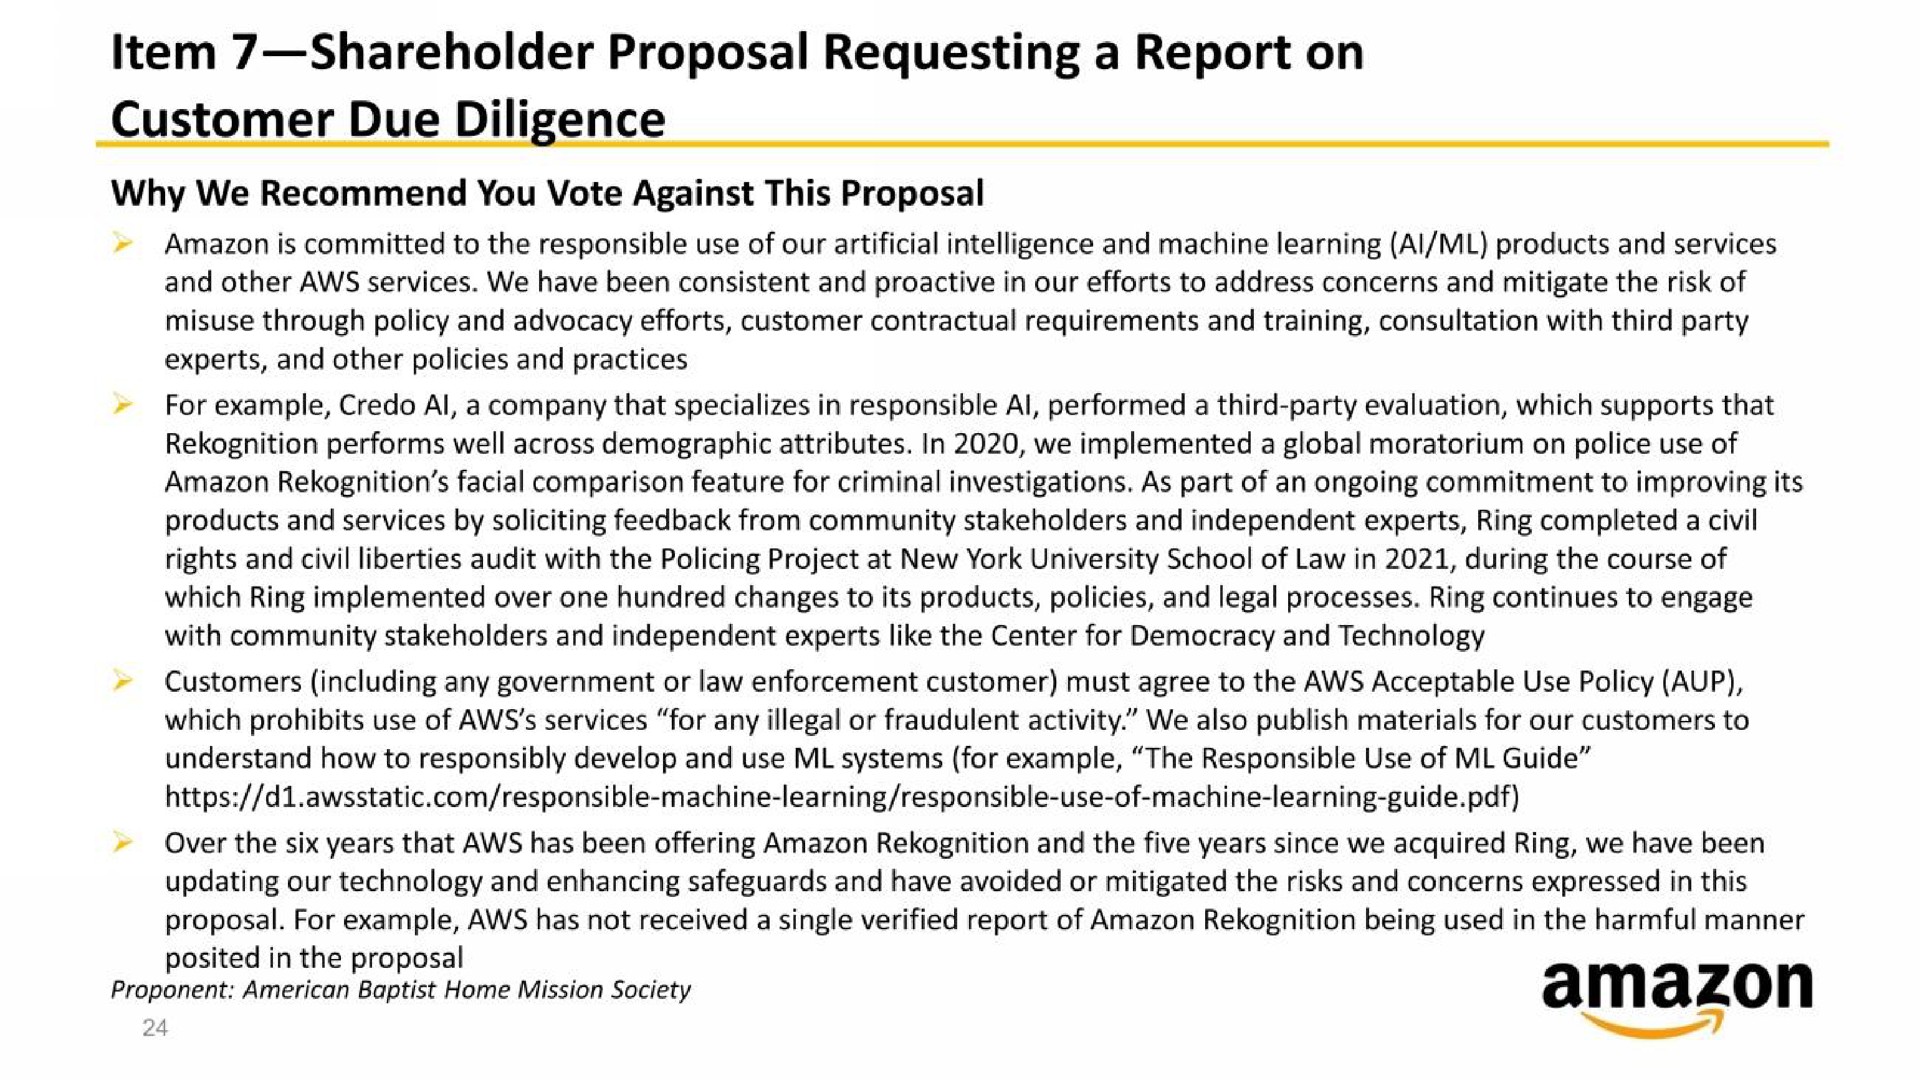 item shareholder proposal requesting a report on customer due diligence | Amazon